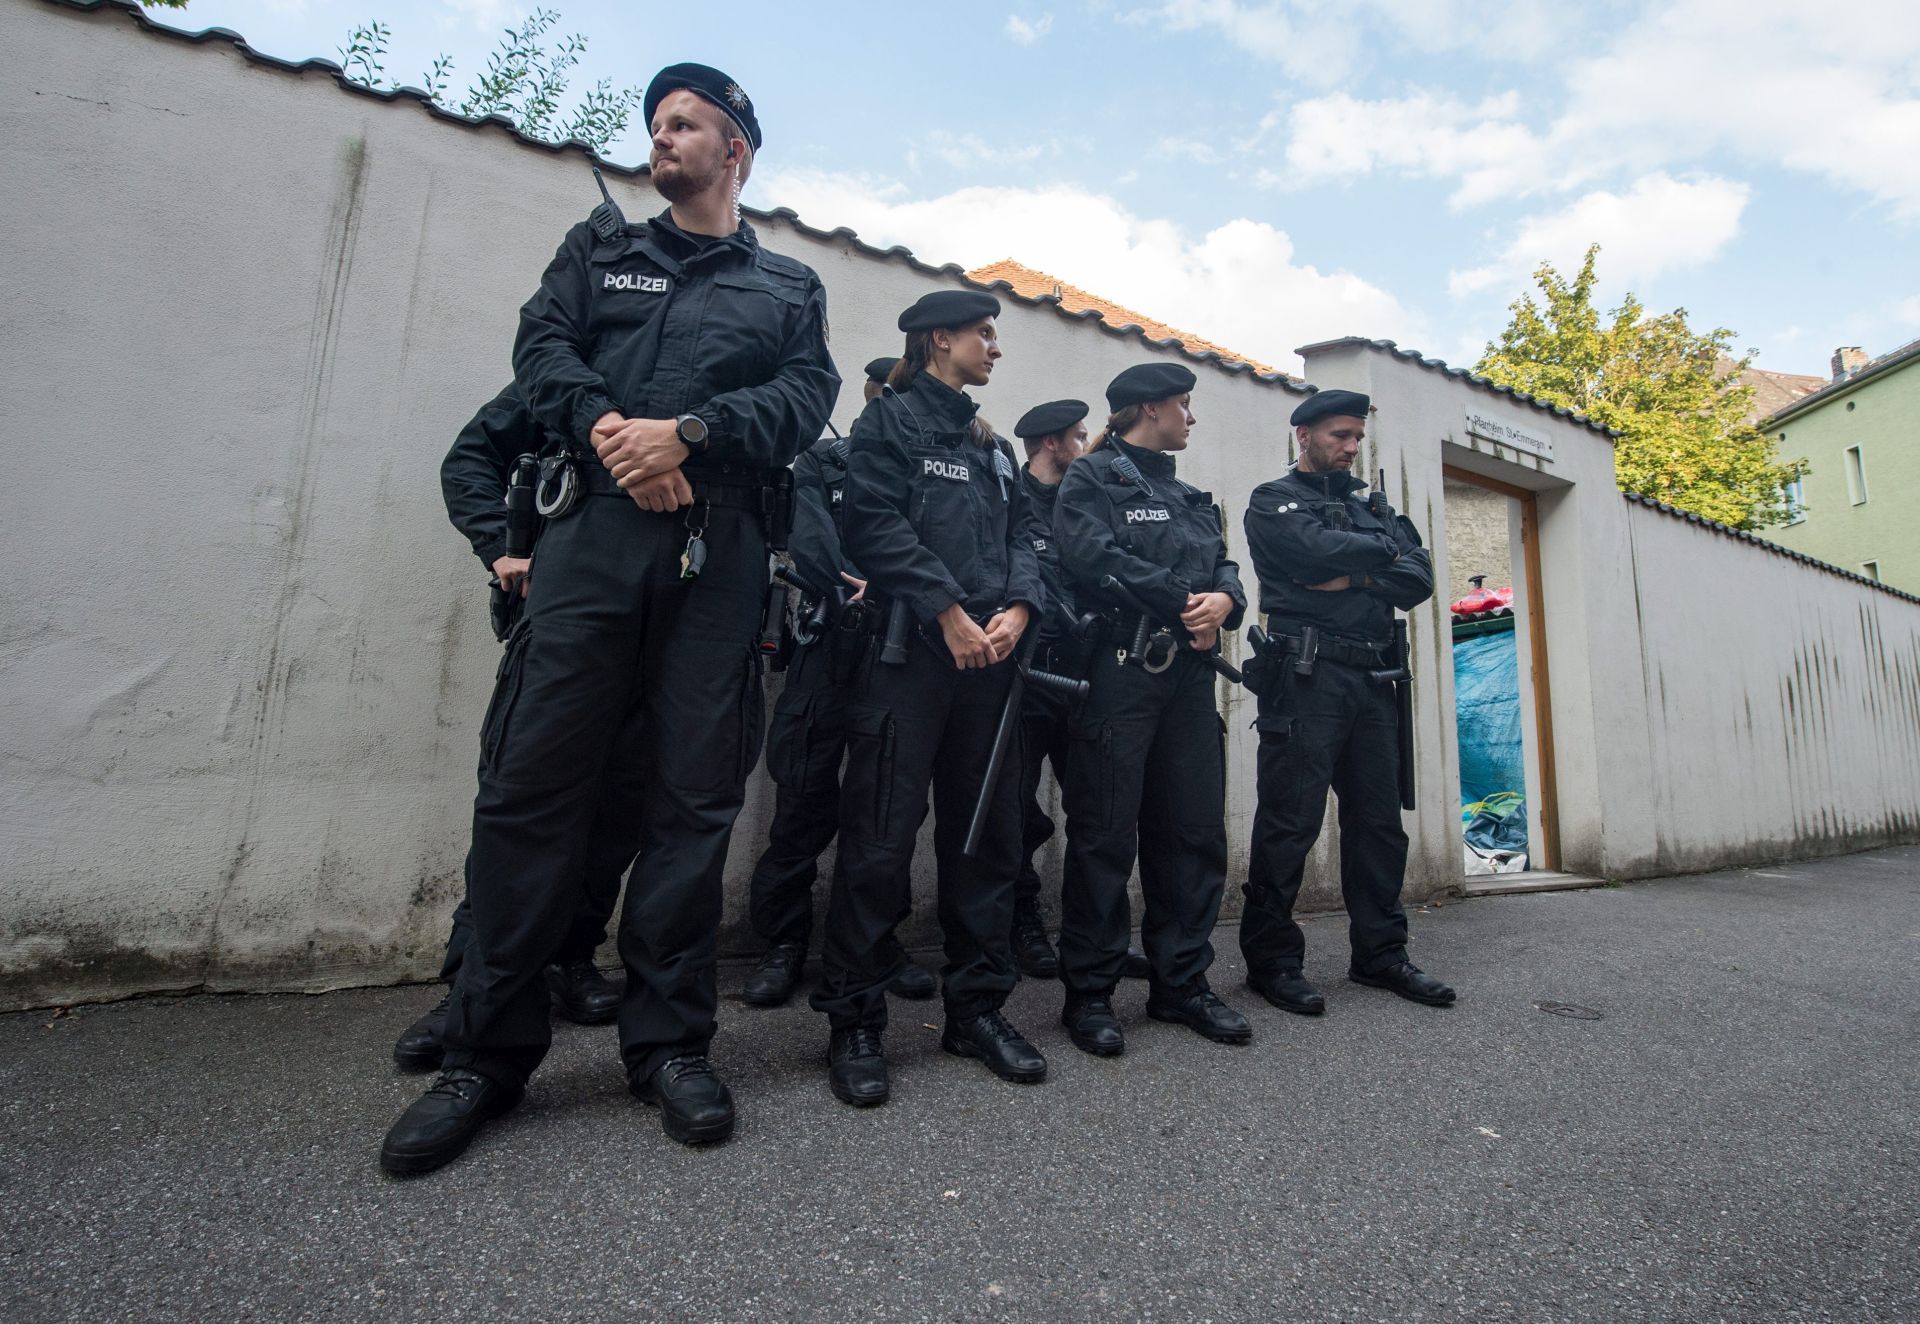 epa05465081 Police officers standing in front of the parish hall of St. Emmeram where refugees were living in Regensburg, Germany, 08 August 2016. For five weeks refugees have demonstrated with assistance from the Church for their right to stay - on Monday the parish hall has been cleared out by the police.  EPA/ARMIN WEIGEL